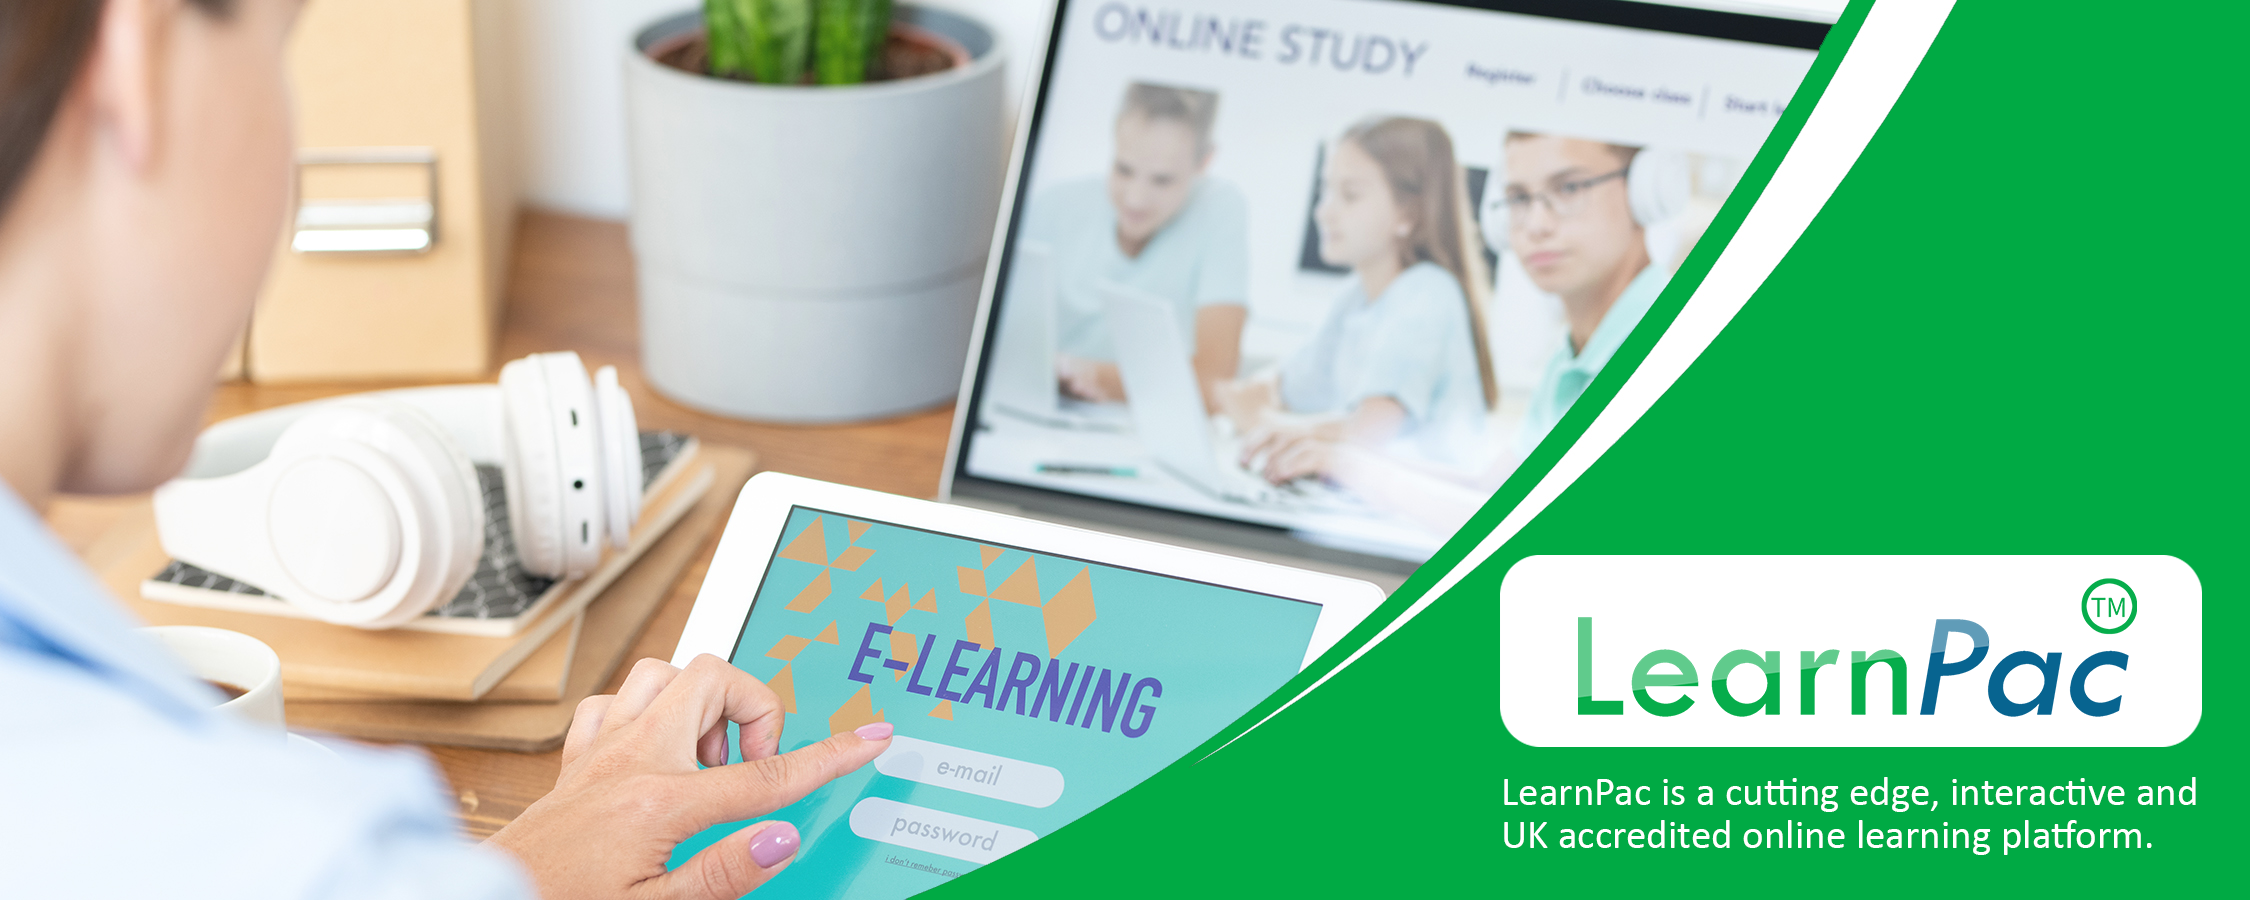 Mandatory Training for Healthcare Assistants - Online Learning Courses - E-Learning Courses - LearnPa